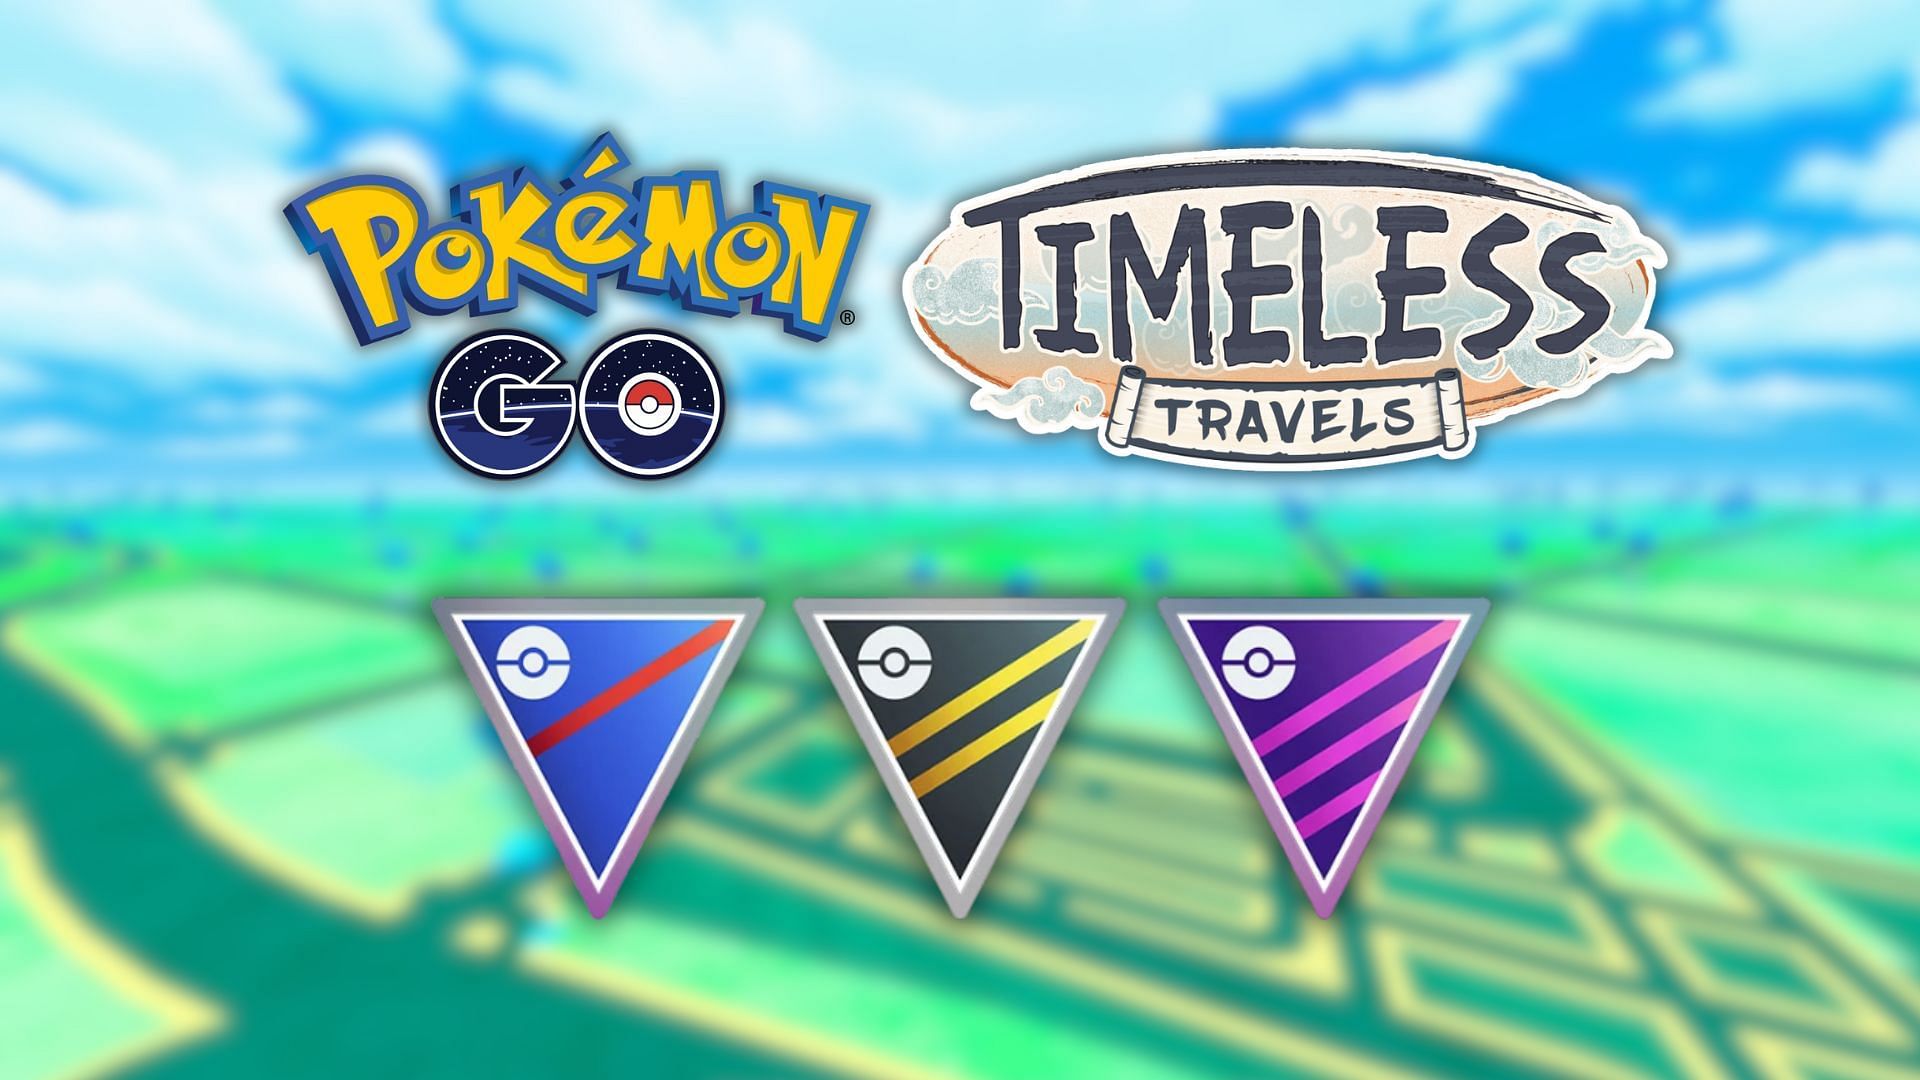 Pokemon GO Battle Day: Timeless Travels edition preparation guide